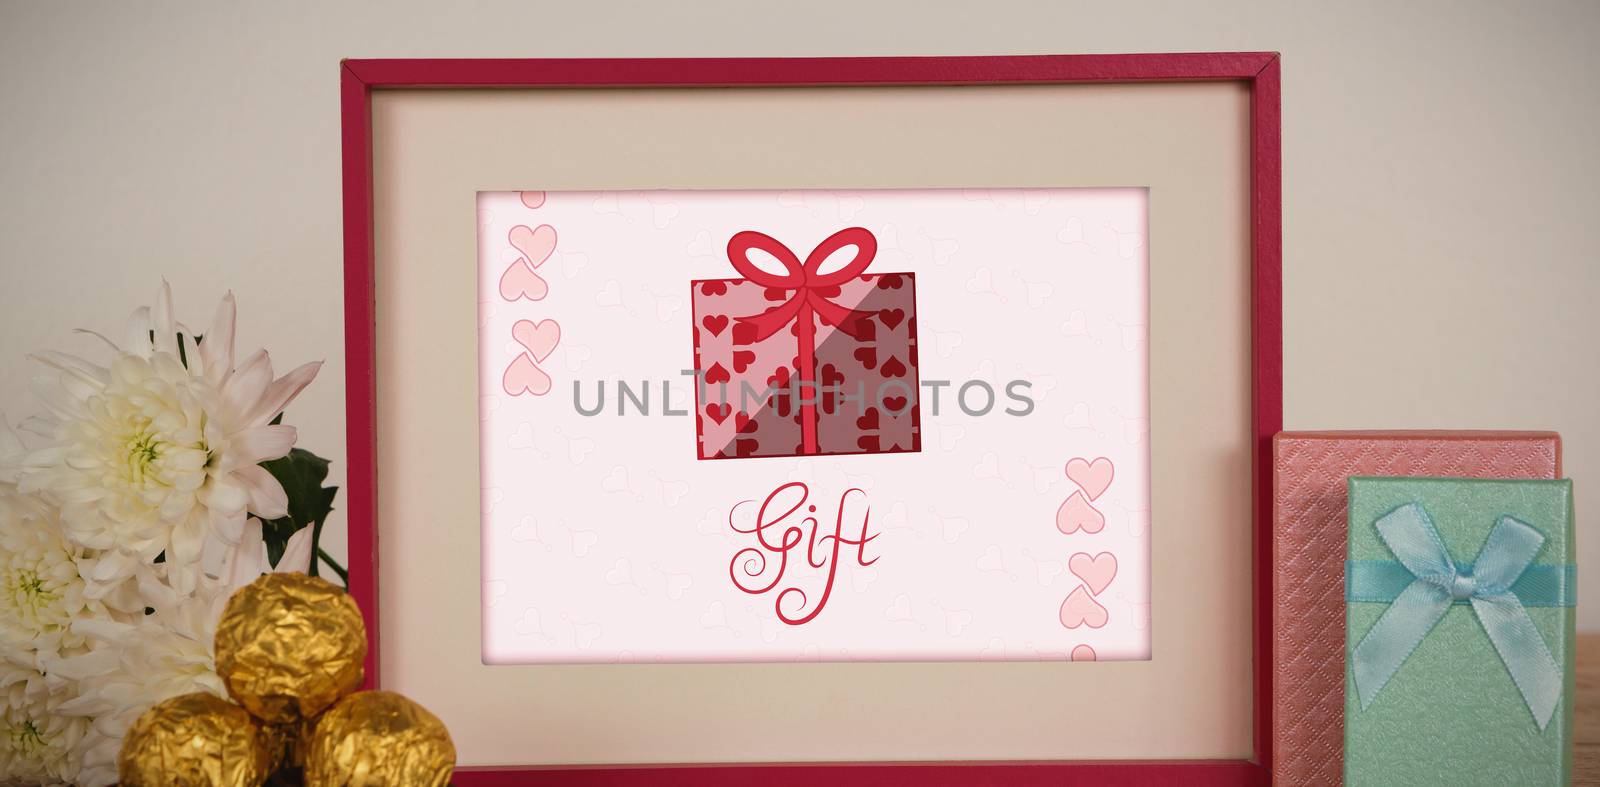 Cute Valentines Day message in Frame on desk with gifts and petals